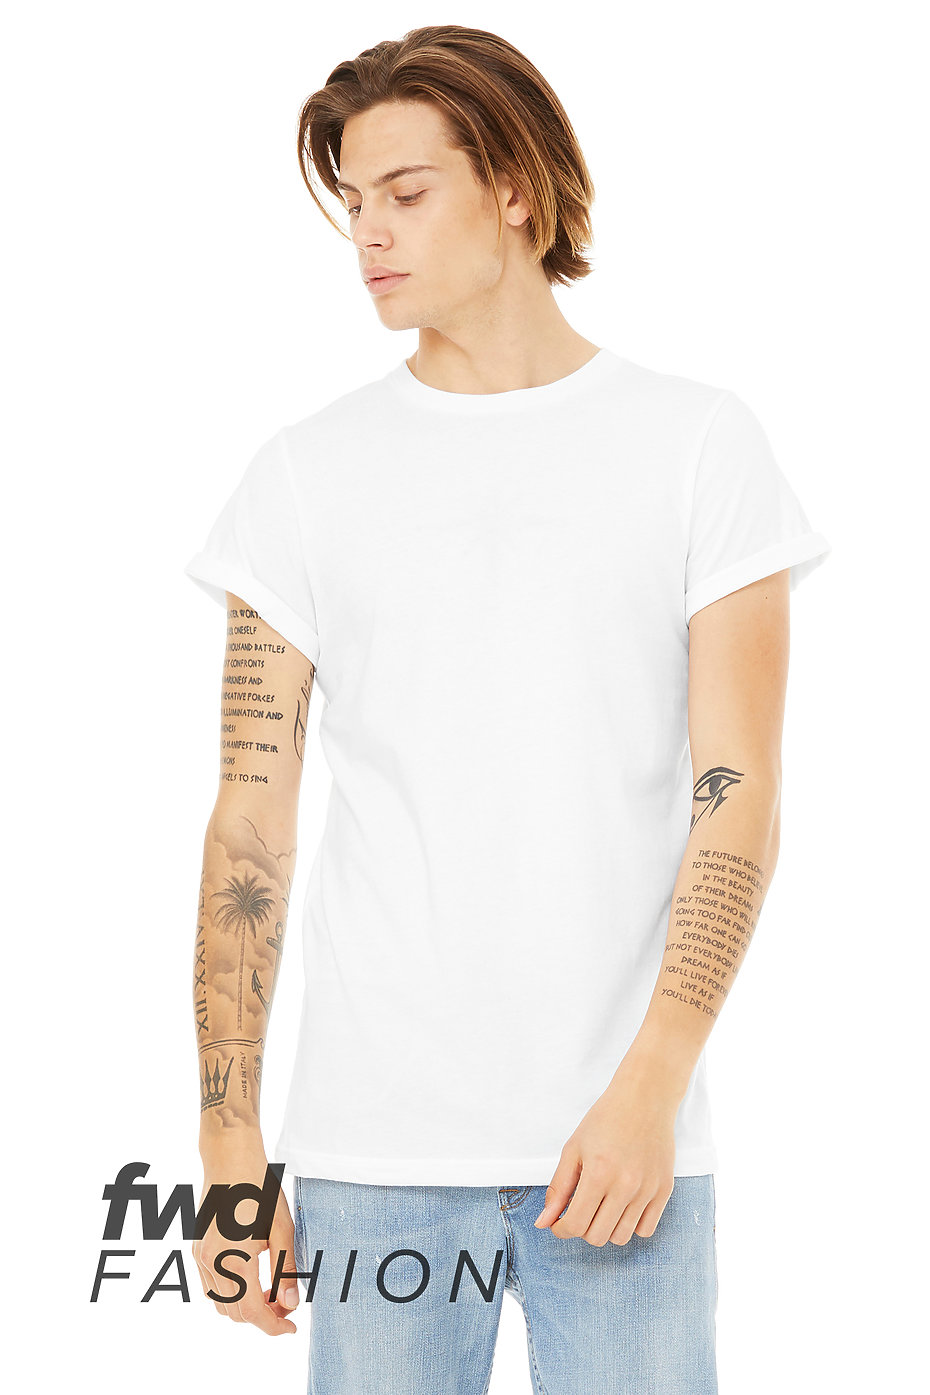 Bella + Canvas Unisex Jersey Rolled Cuff Tee 3004 - Model Image